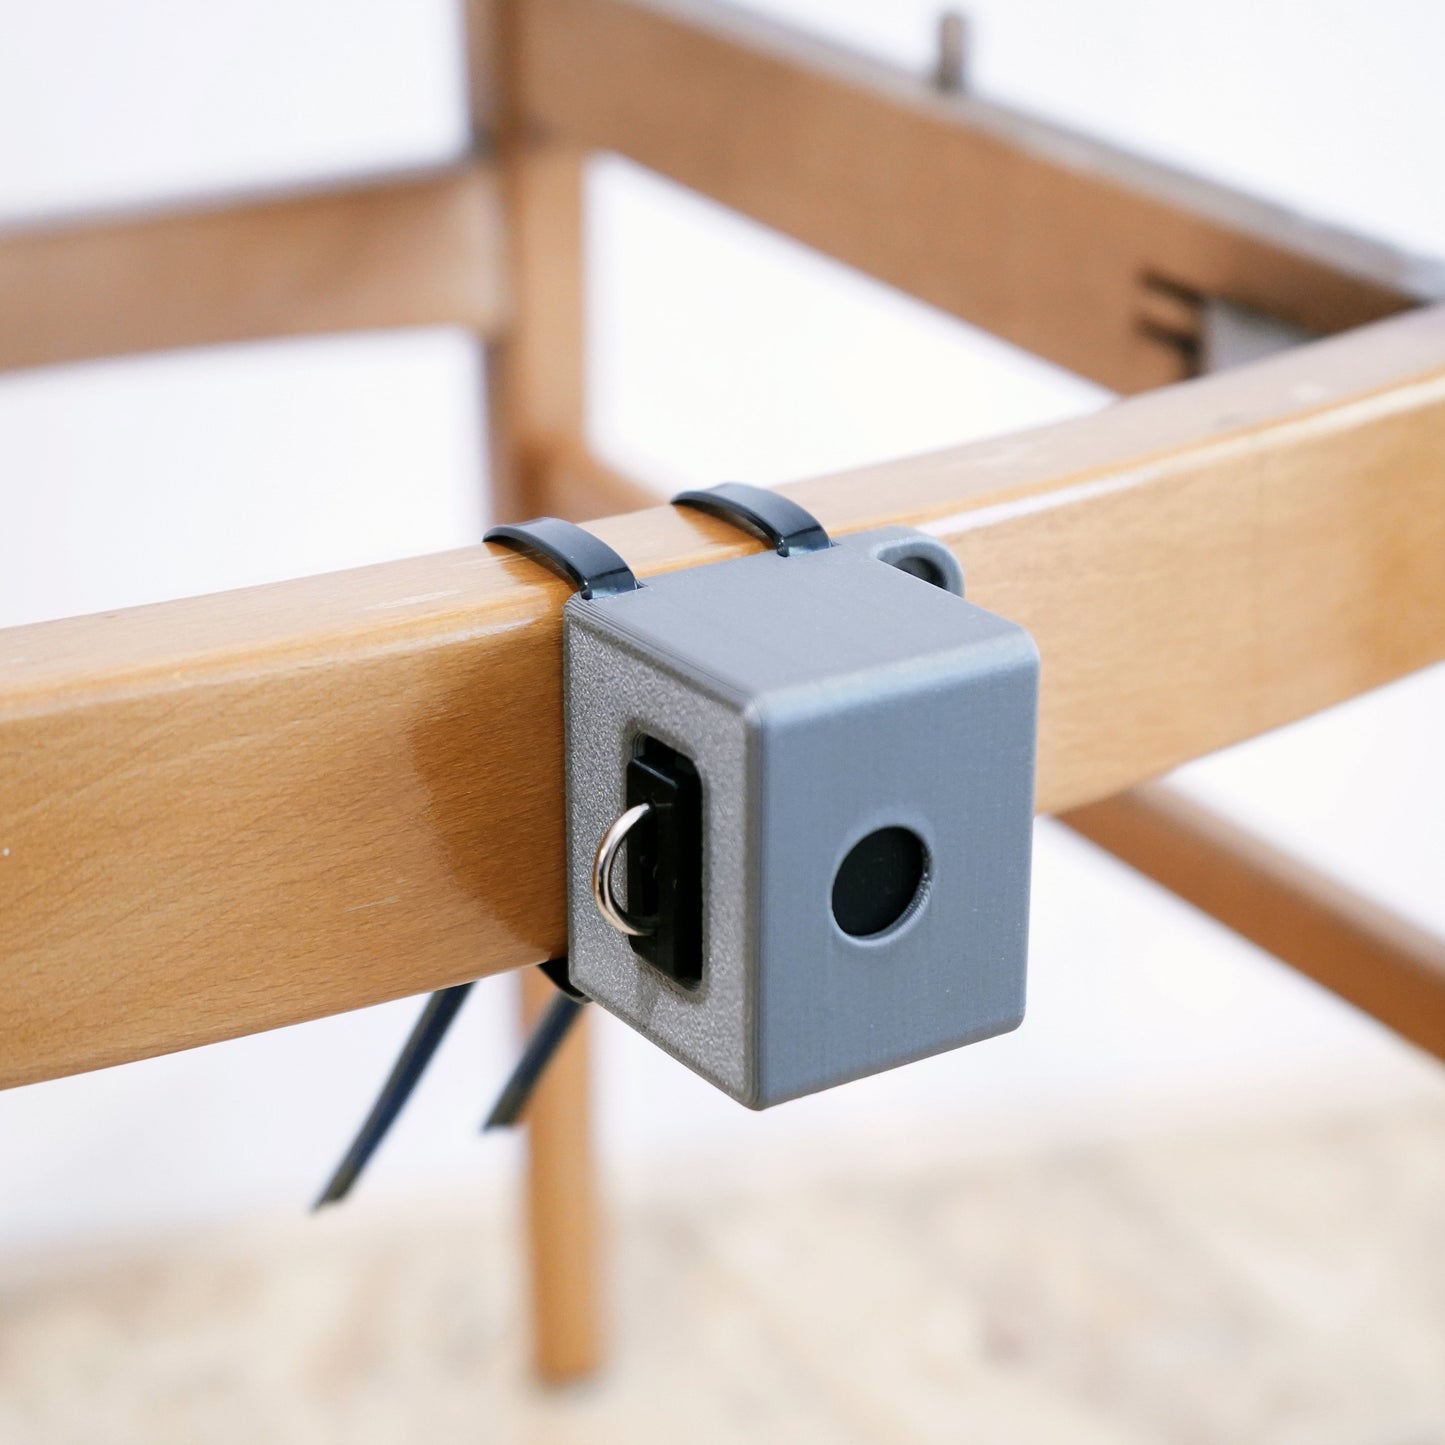 New design: selfbondage chair mount with time lock - one hour locking time